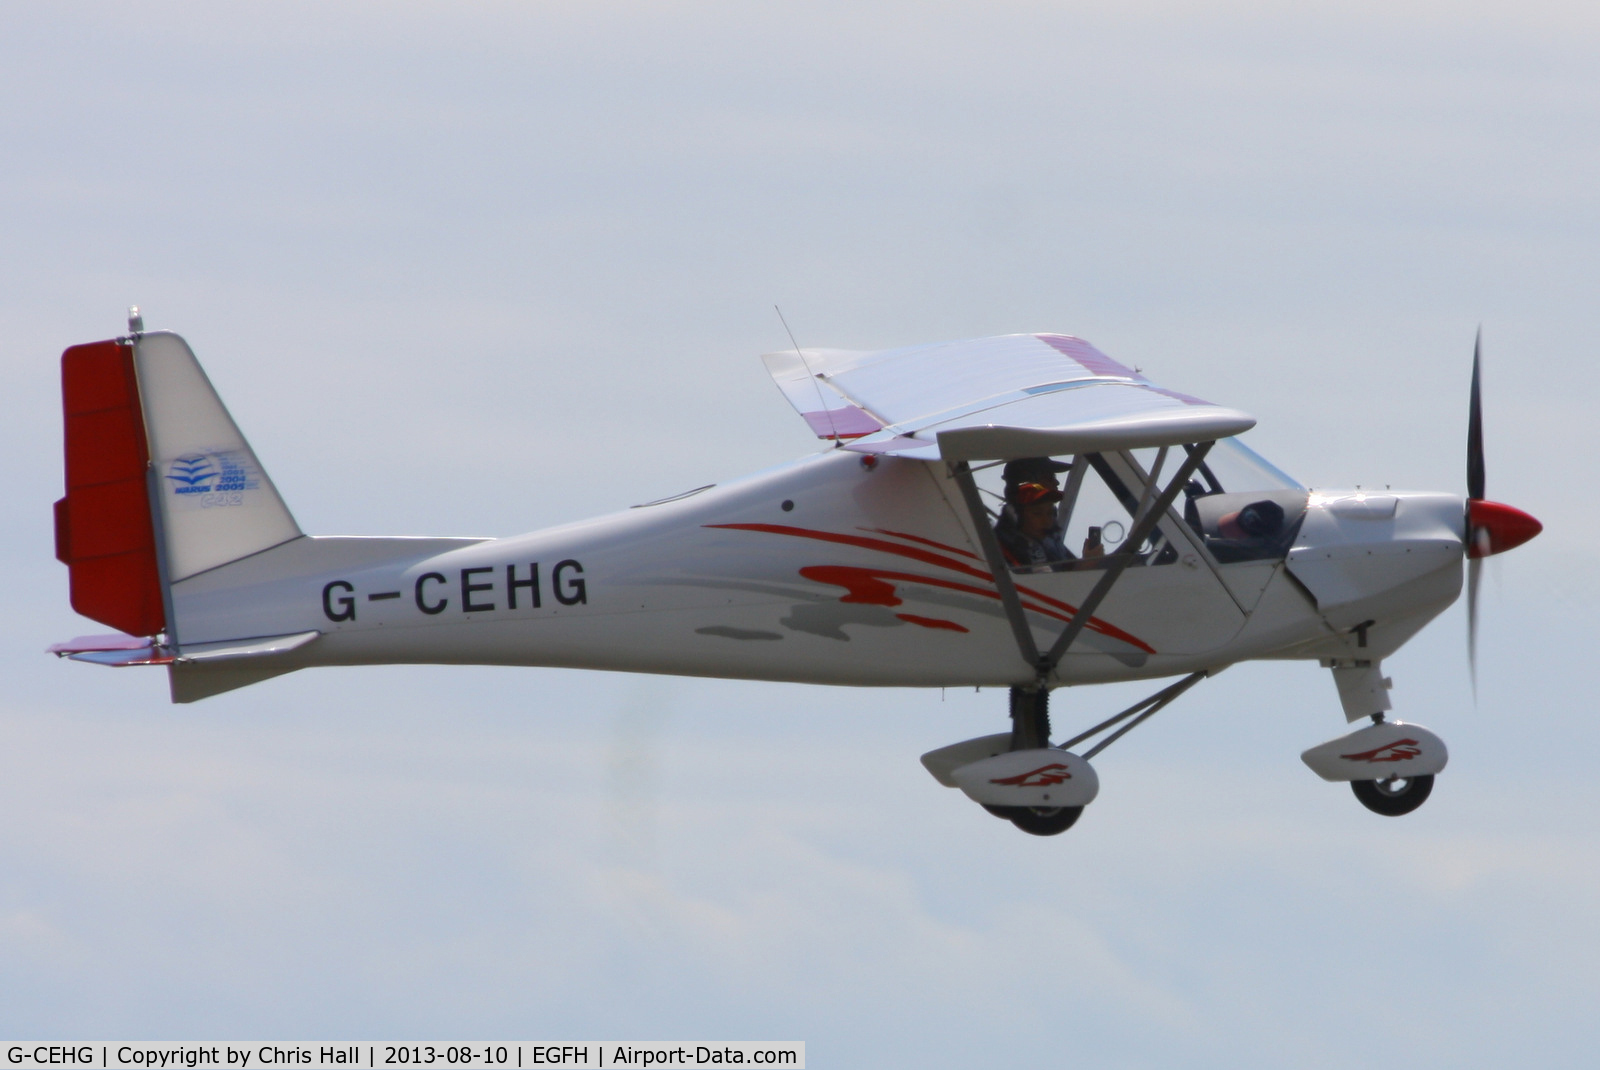 G-CEHG, 2006 Comco Ikarus C42 FB100 C/N 0612-6861, privately owned